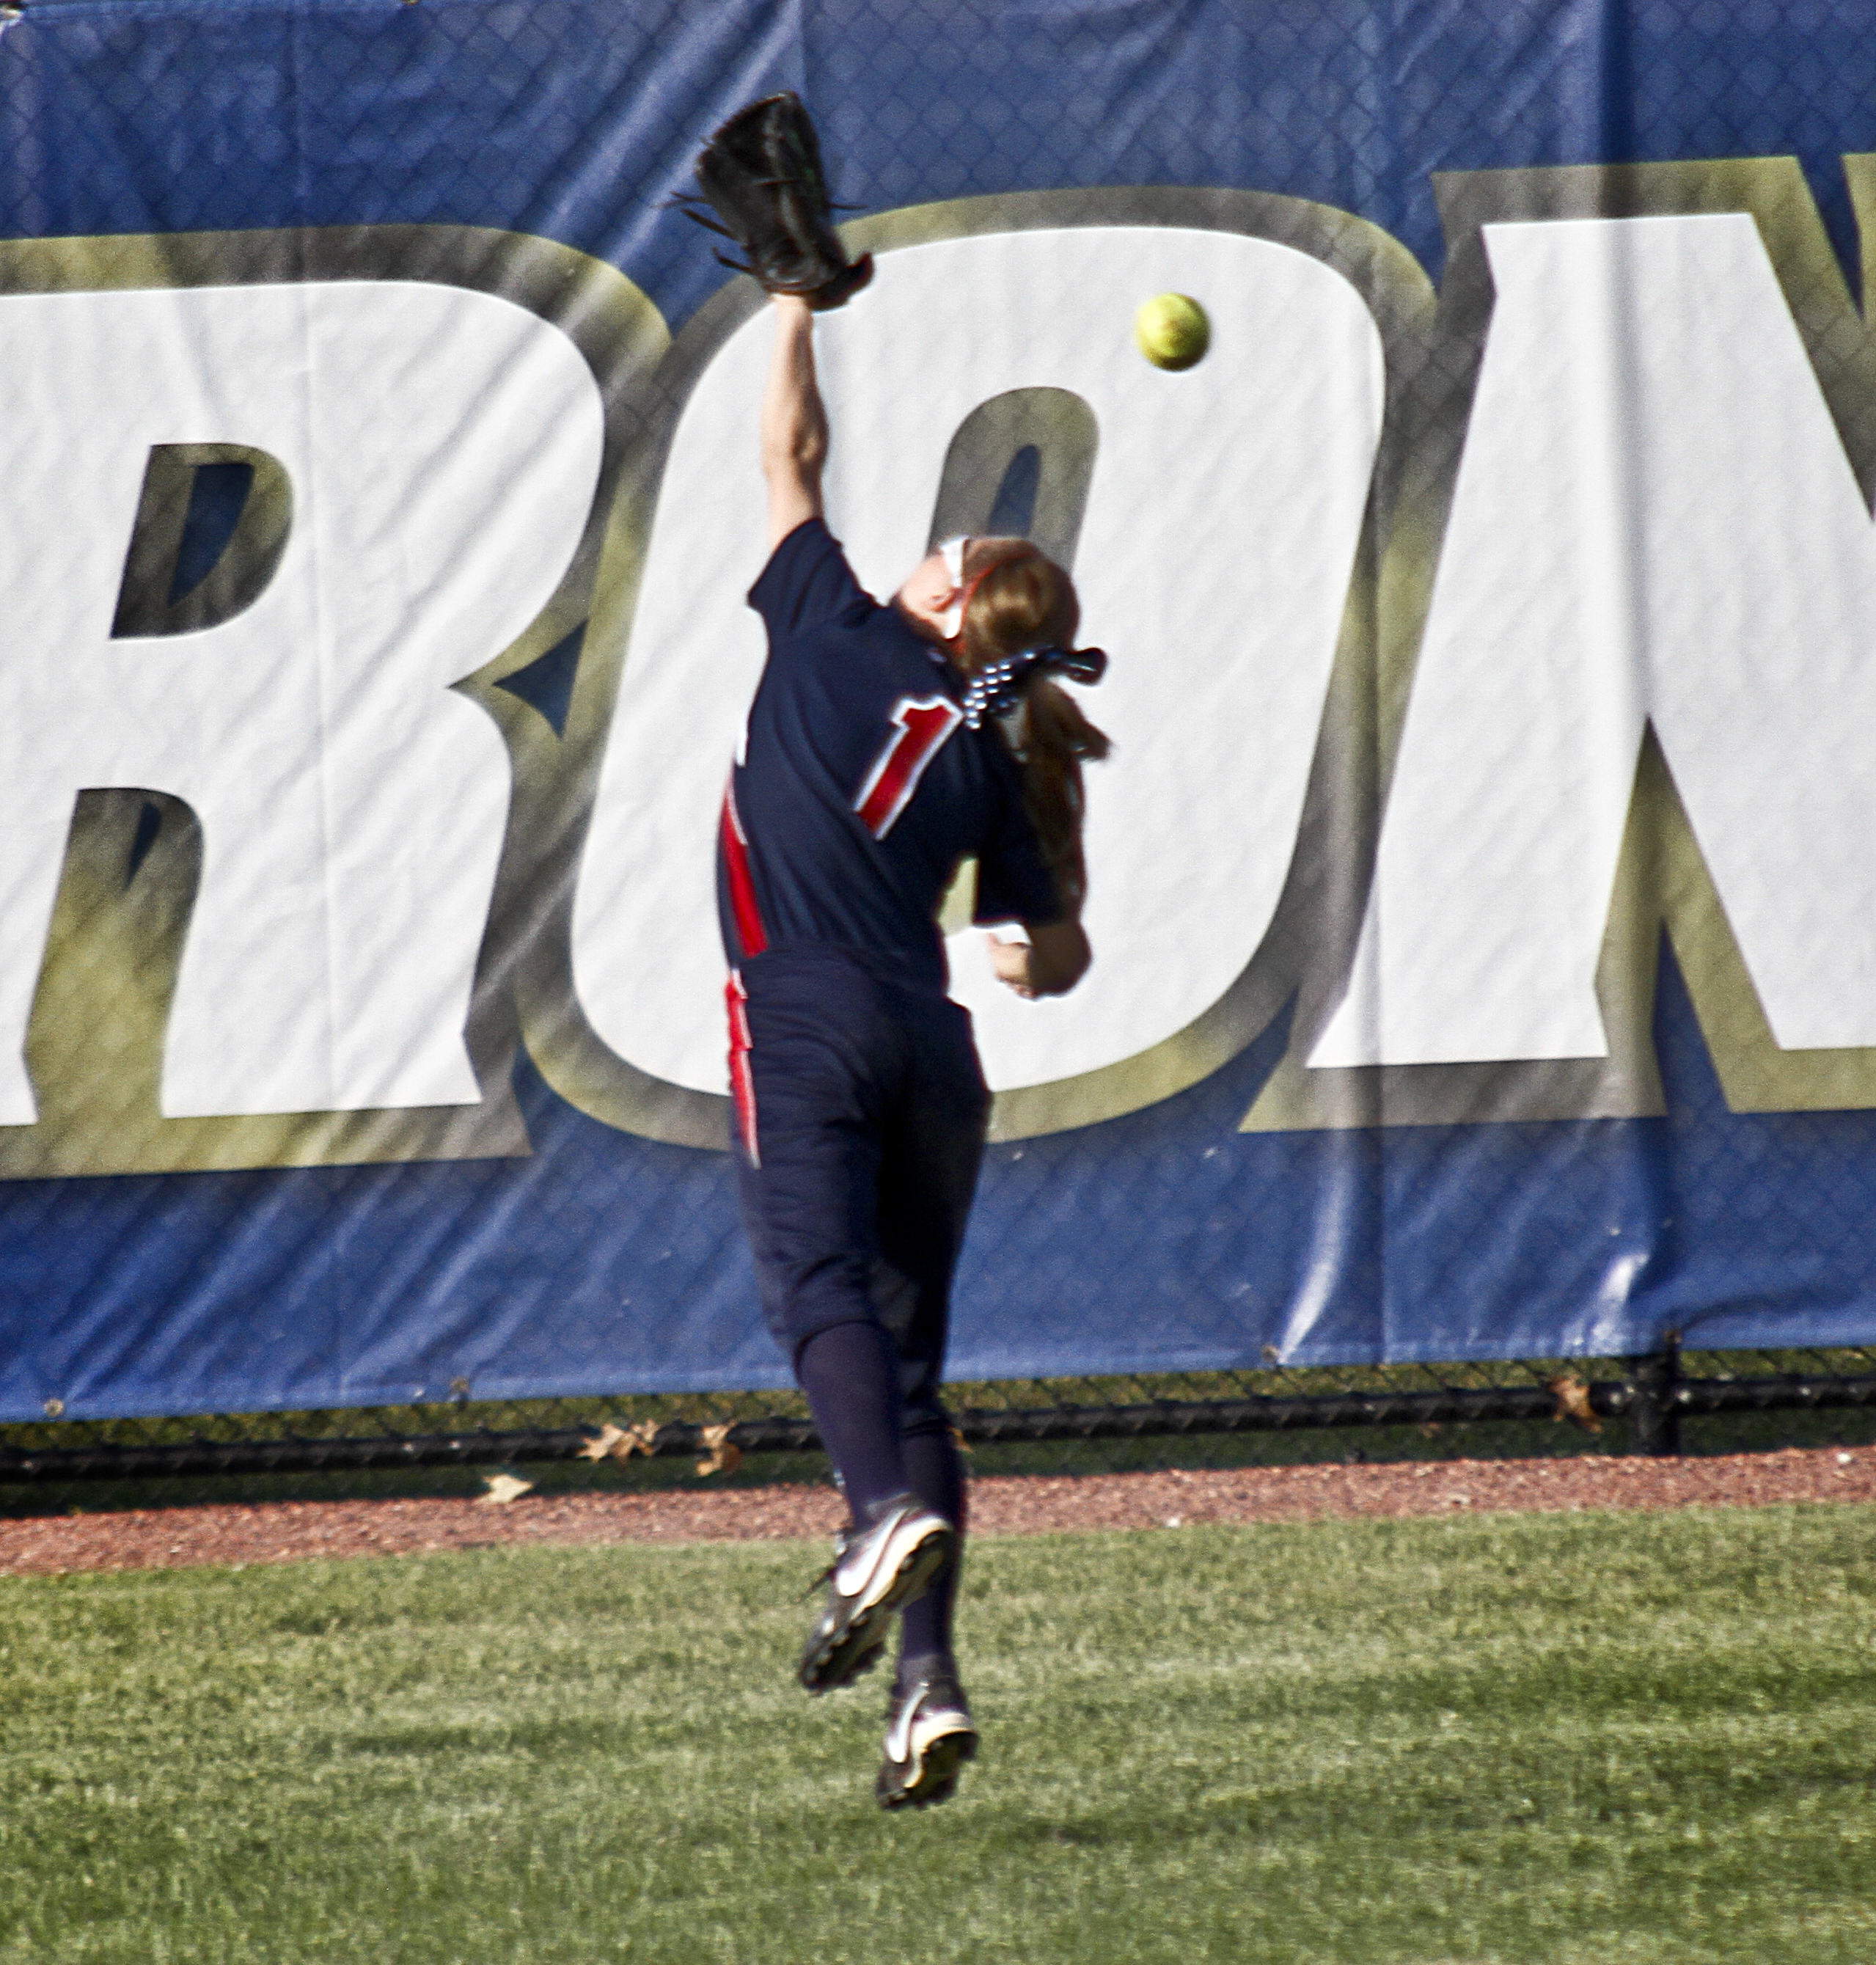 MADELYN P. HASTINGS I THE VINDICATOR

Fitch's Alana Callahan (1) misses the ball during their game against Medina at the University of Akron on May 30, 2013. Fitch lost to Medina 5-3.